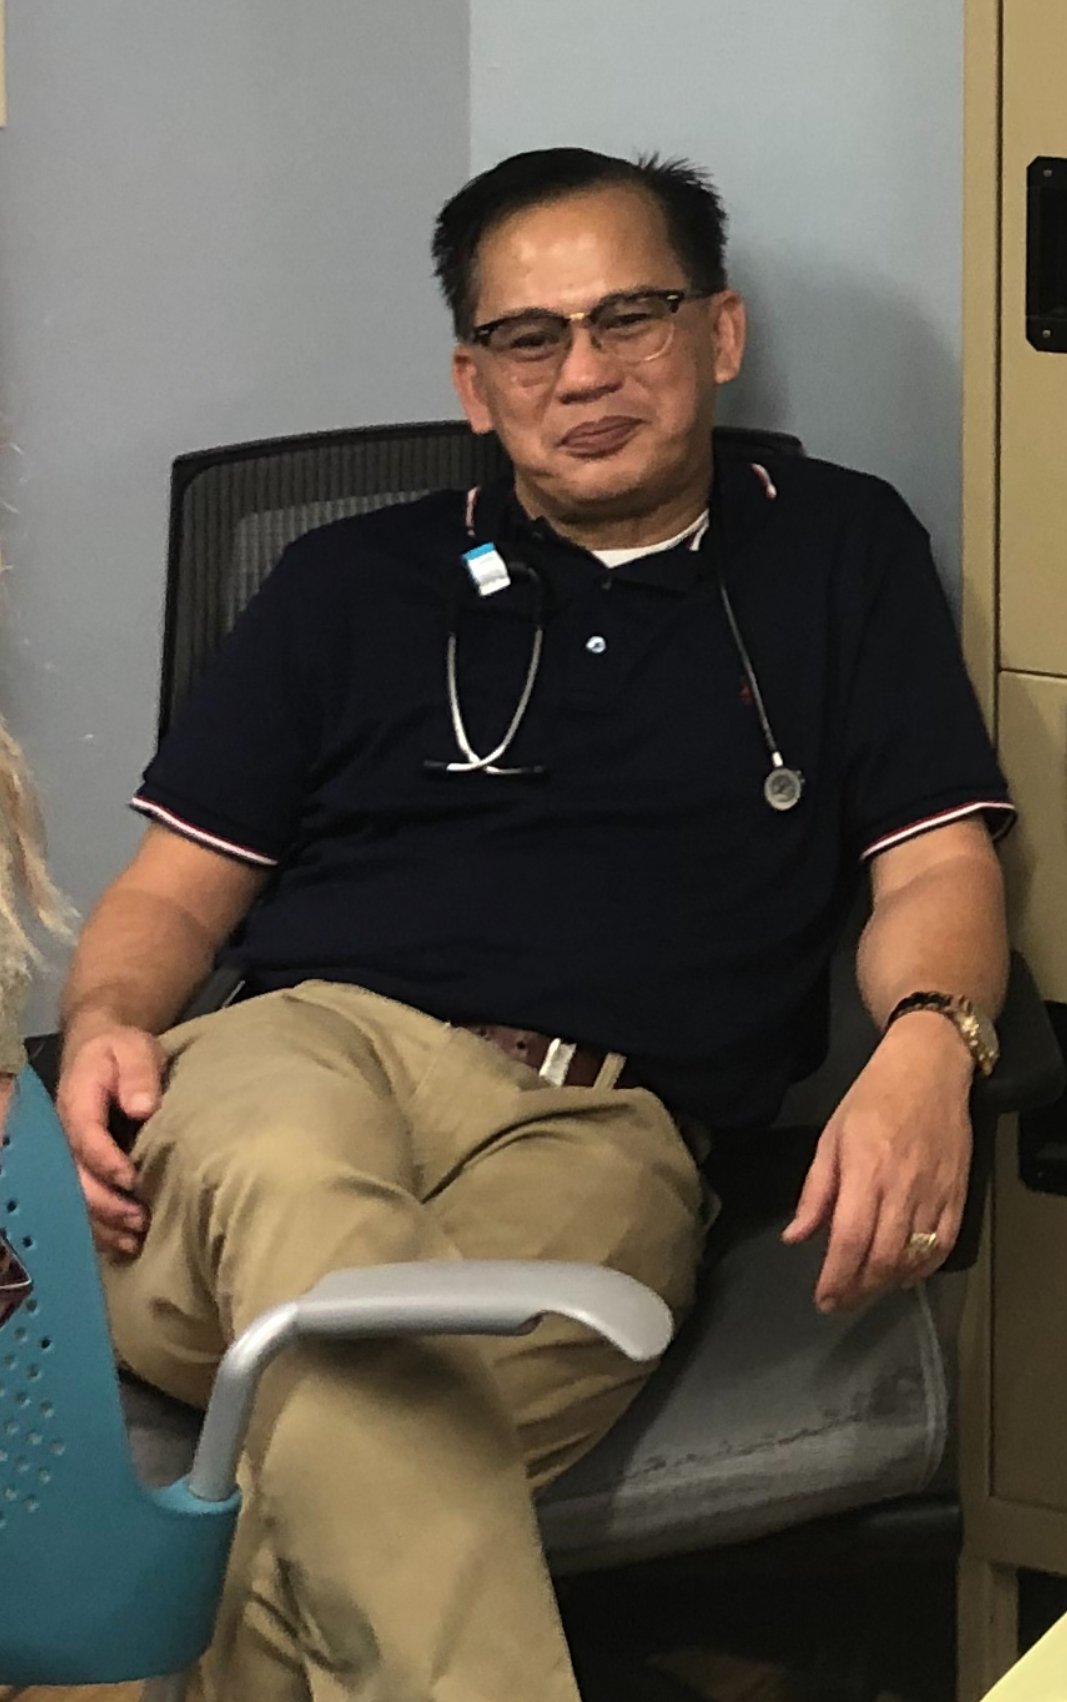 Dr. James Zozobrado sitting in a chair and smiling